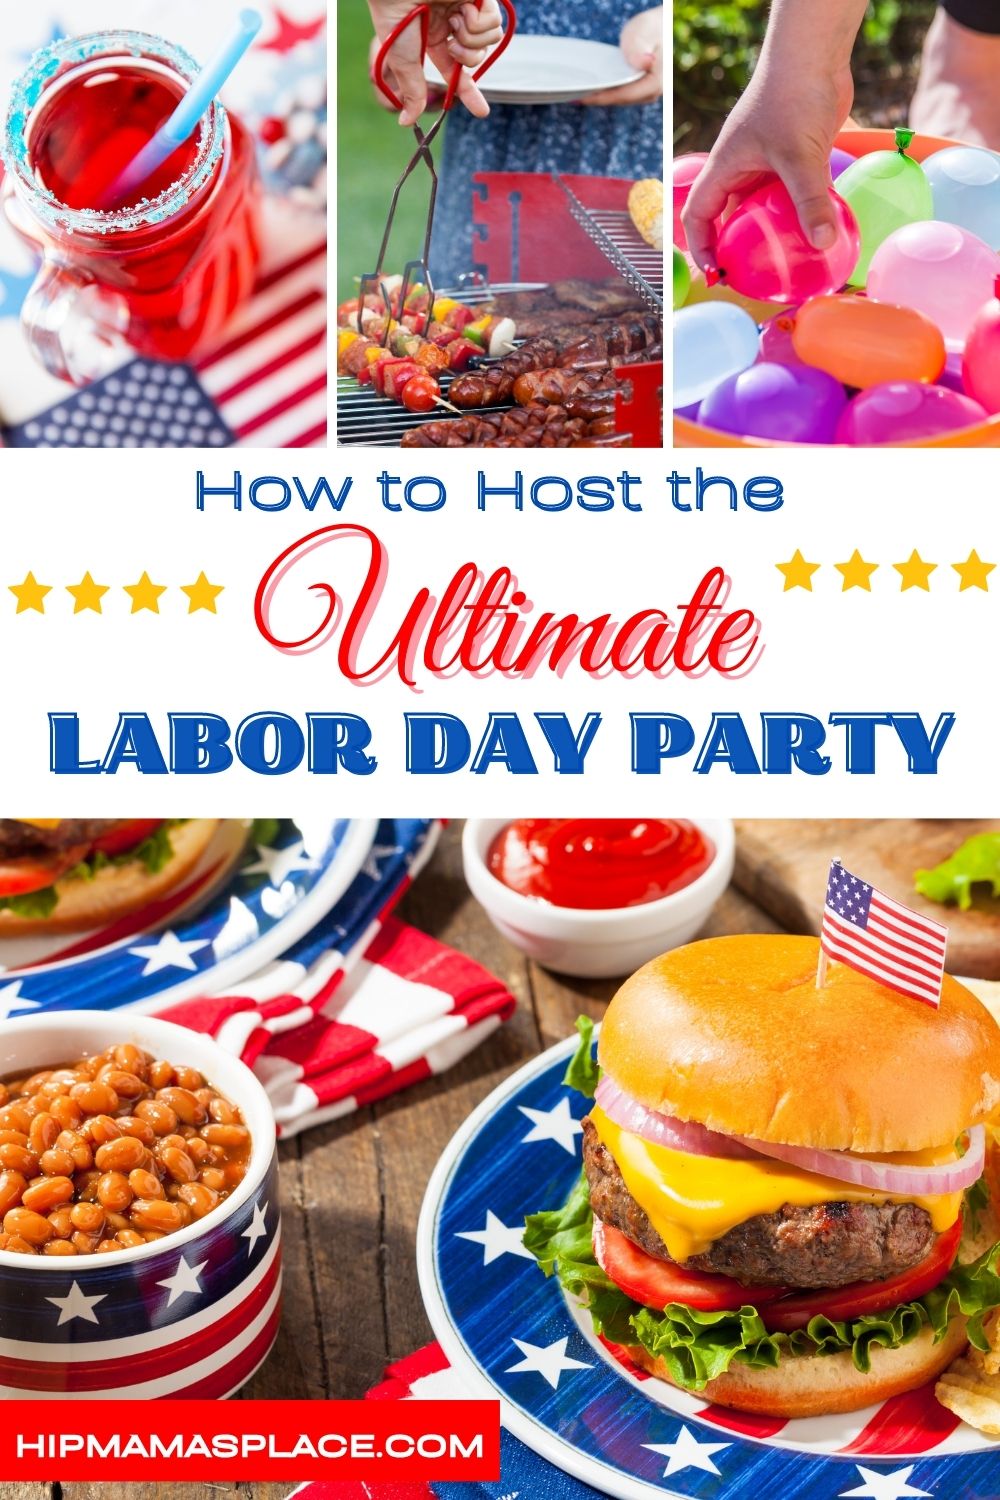 How to Host the Ultimate Labor Day Party